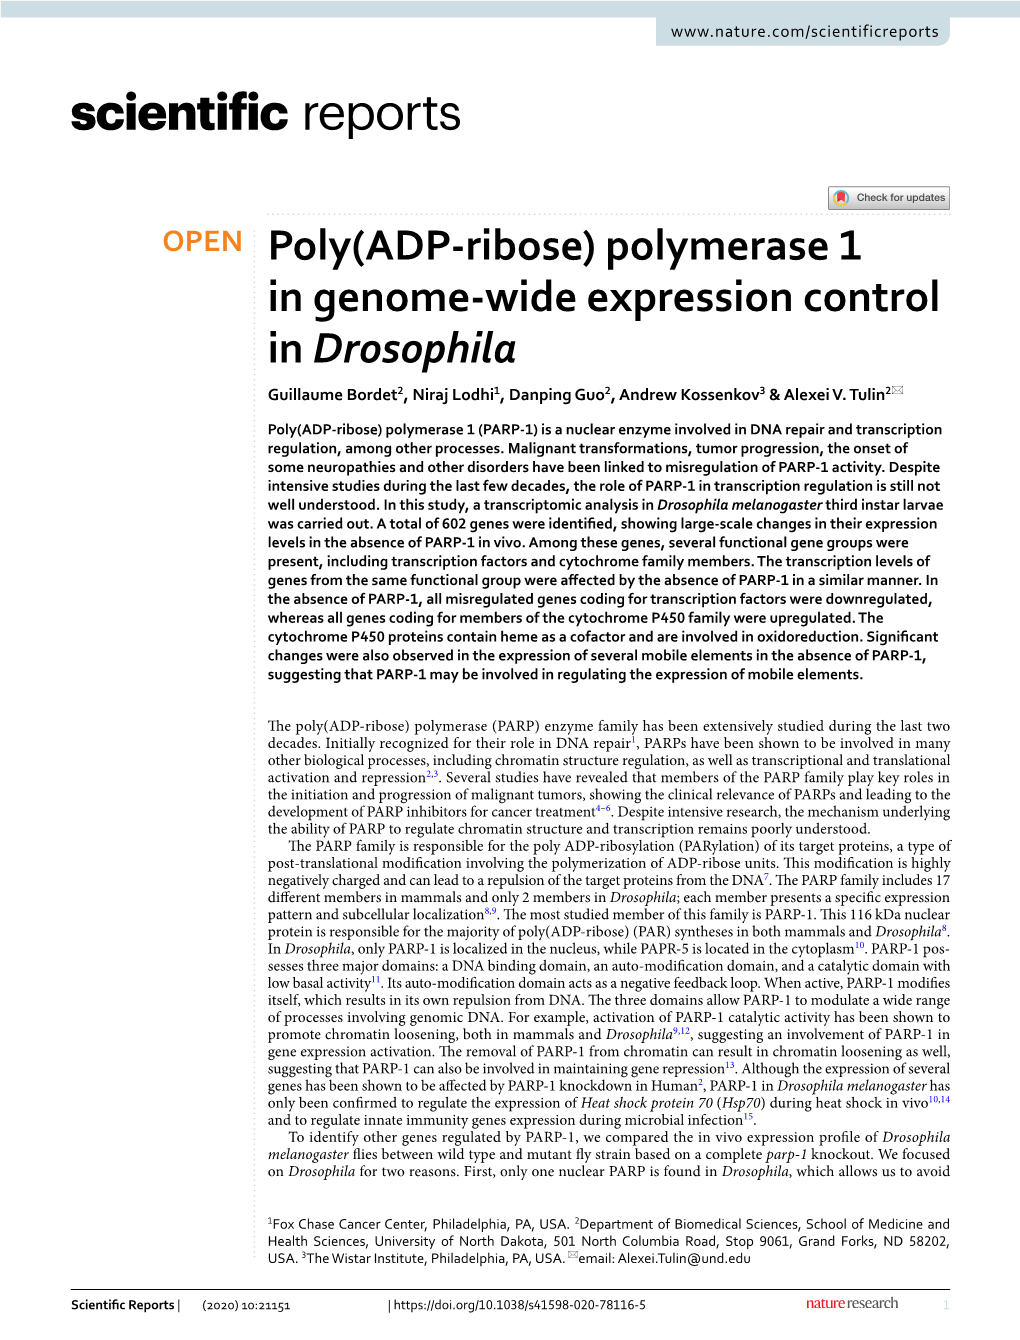 Polymerase 1 in Genome-Wide Expression Control in Drosophila